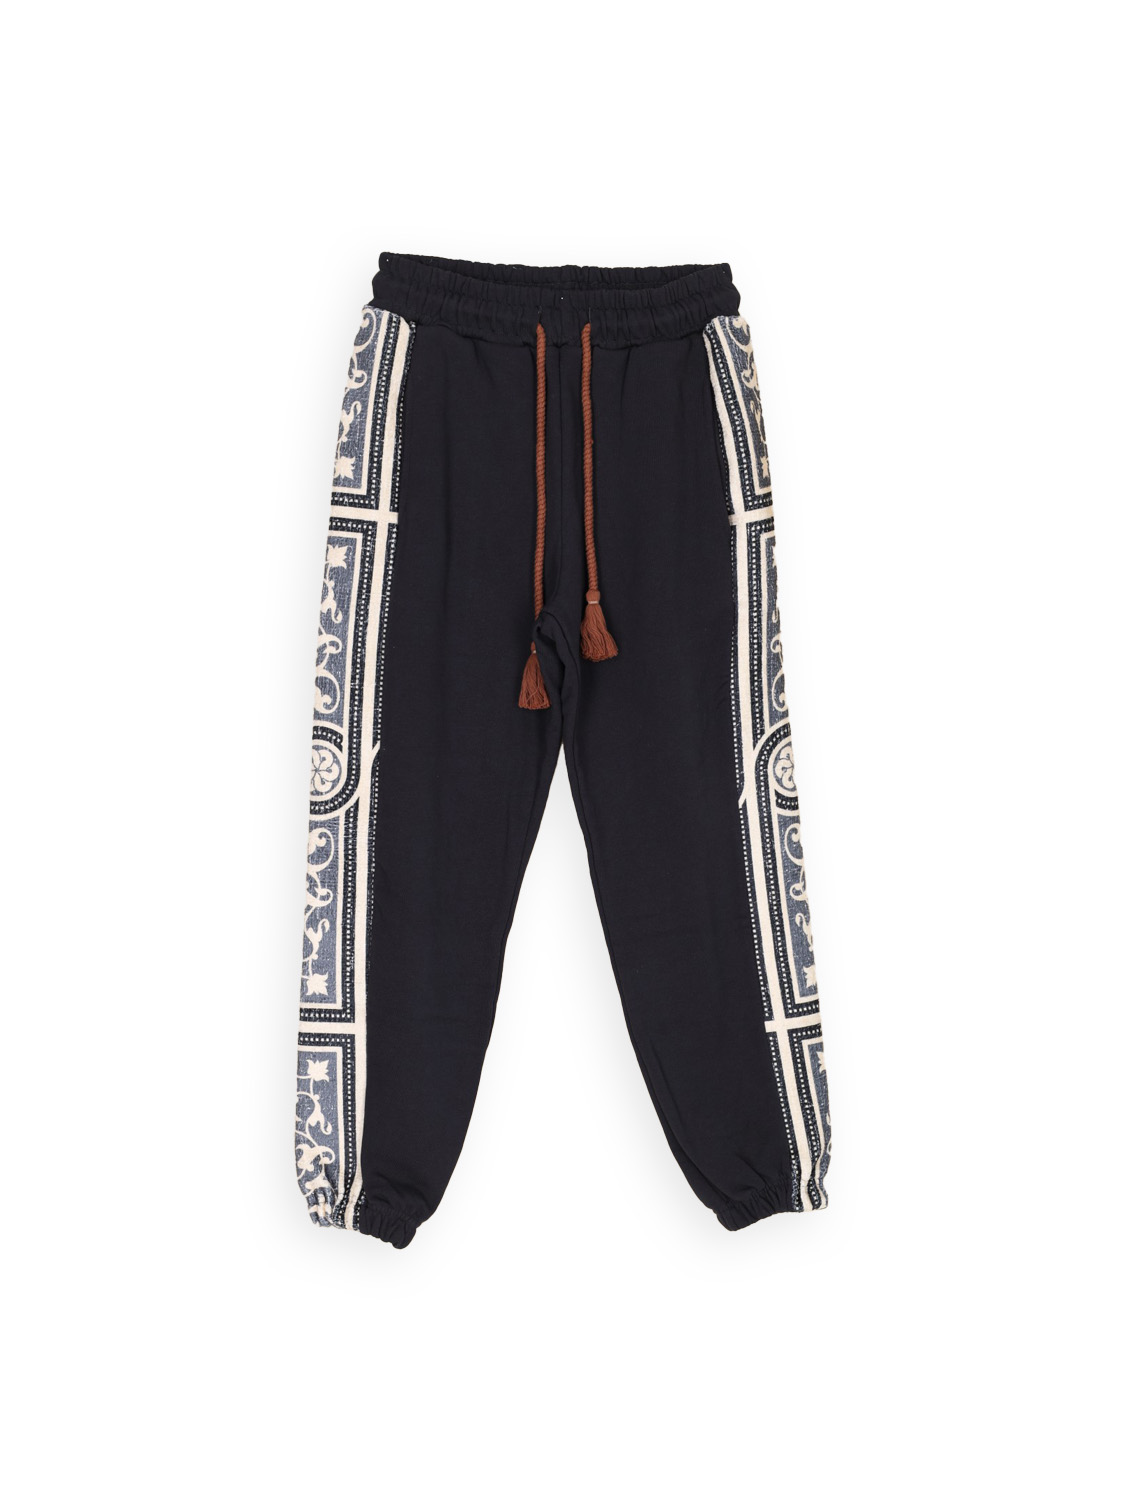 Apxx – Jogger with pattern 